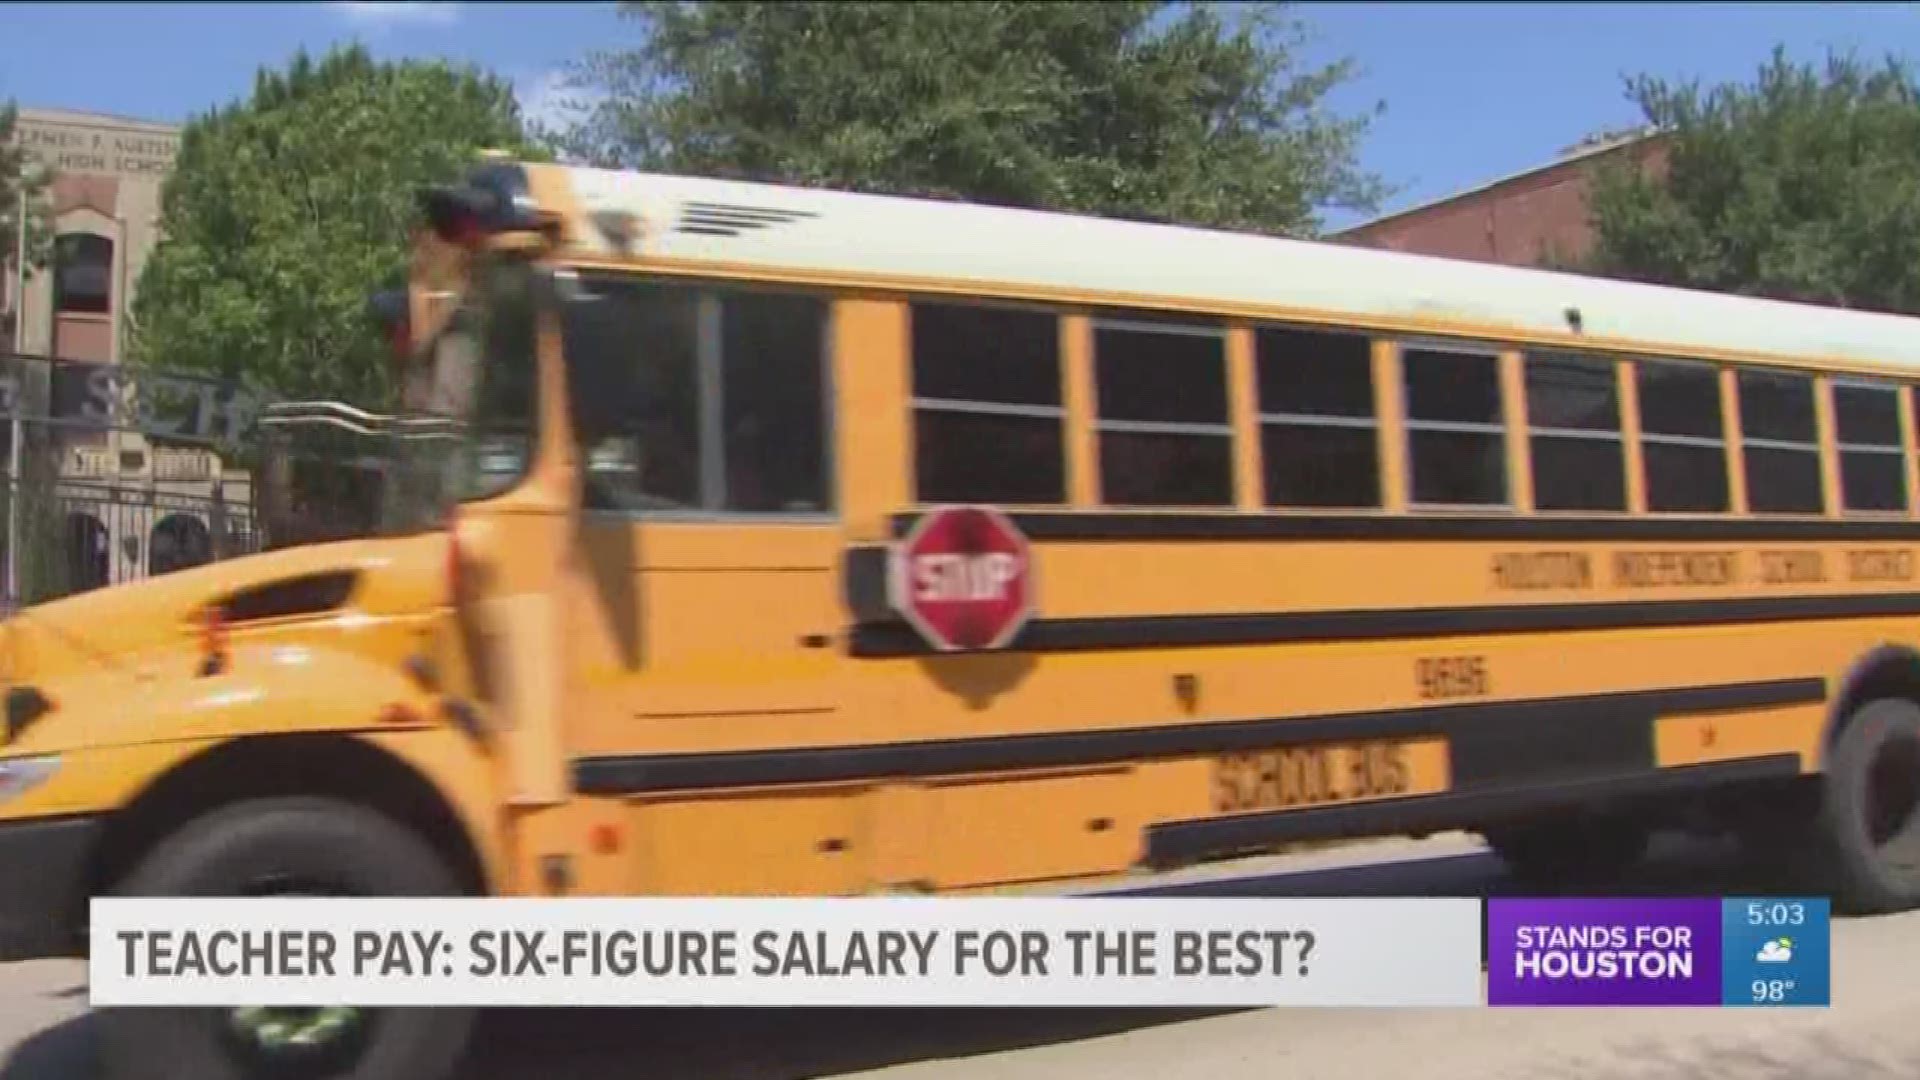 What is a good salary in houston?